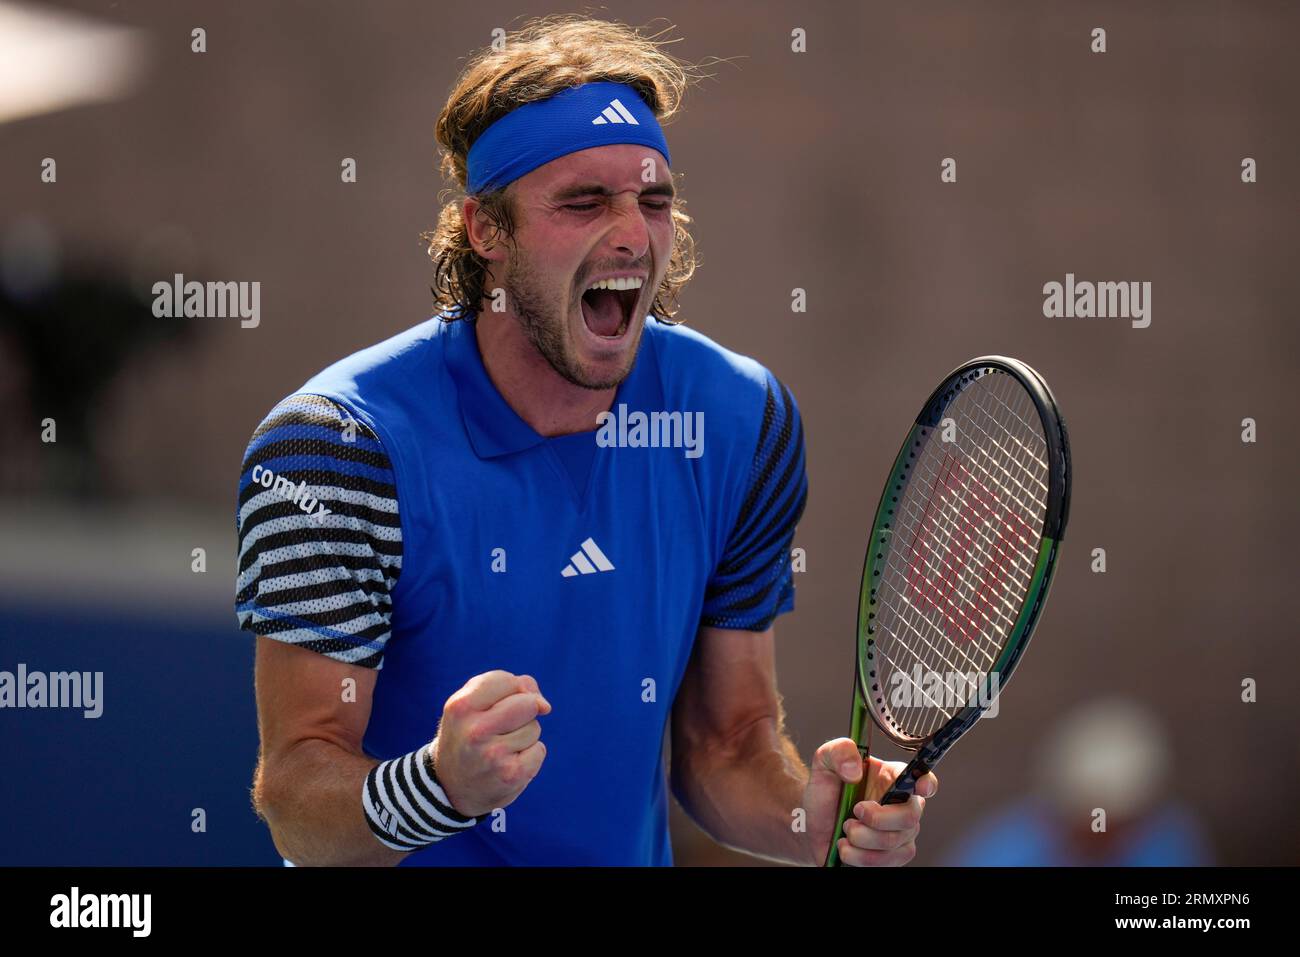 CAPTION CORRECTION CORRECTS MATCH RESULTS Stefanos Tsitsipas, of Greece, reacts during a Dominic Stricker, of Switzerland, during the second round of the U.S